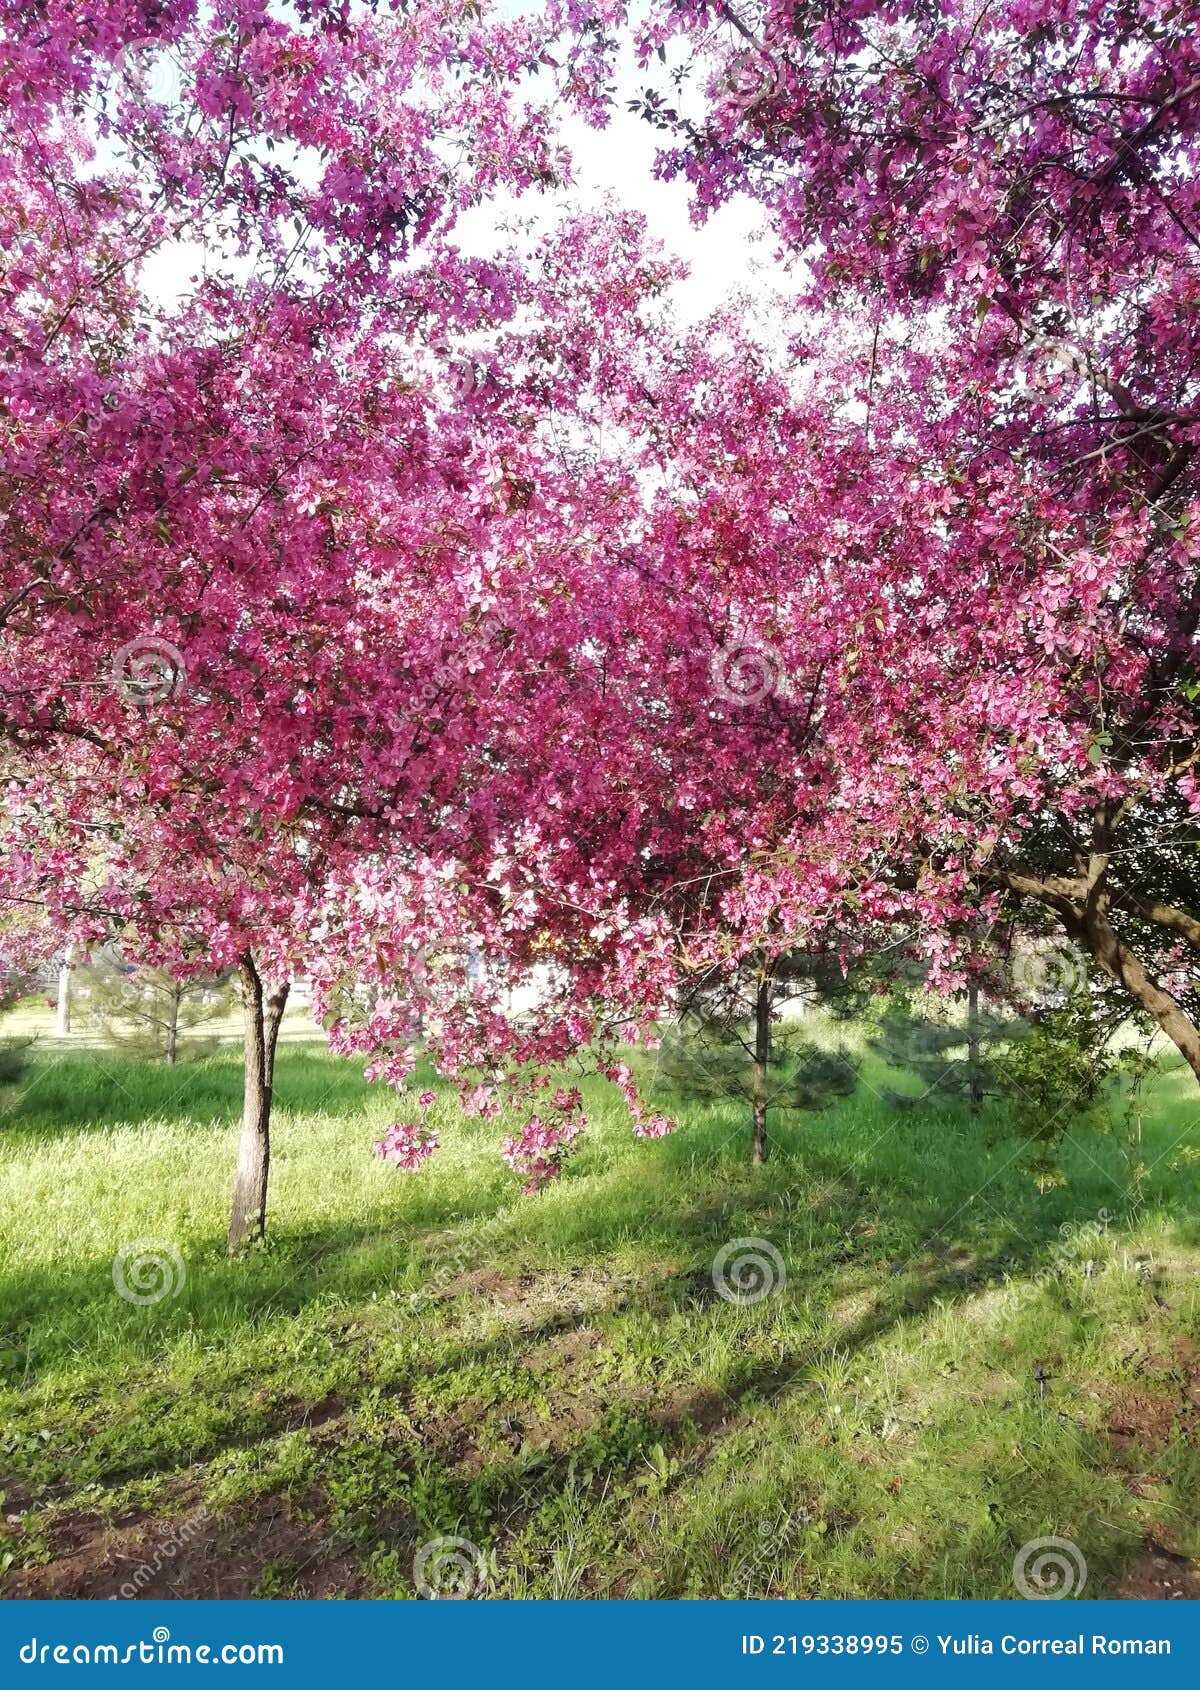 pink blossom peach tree in the park